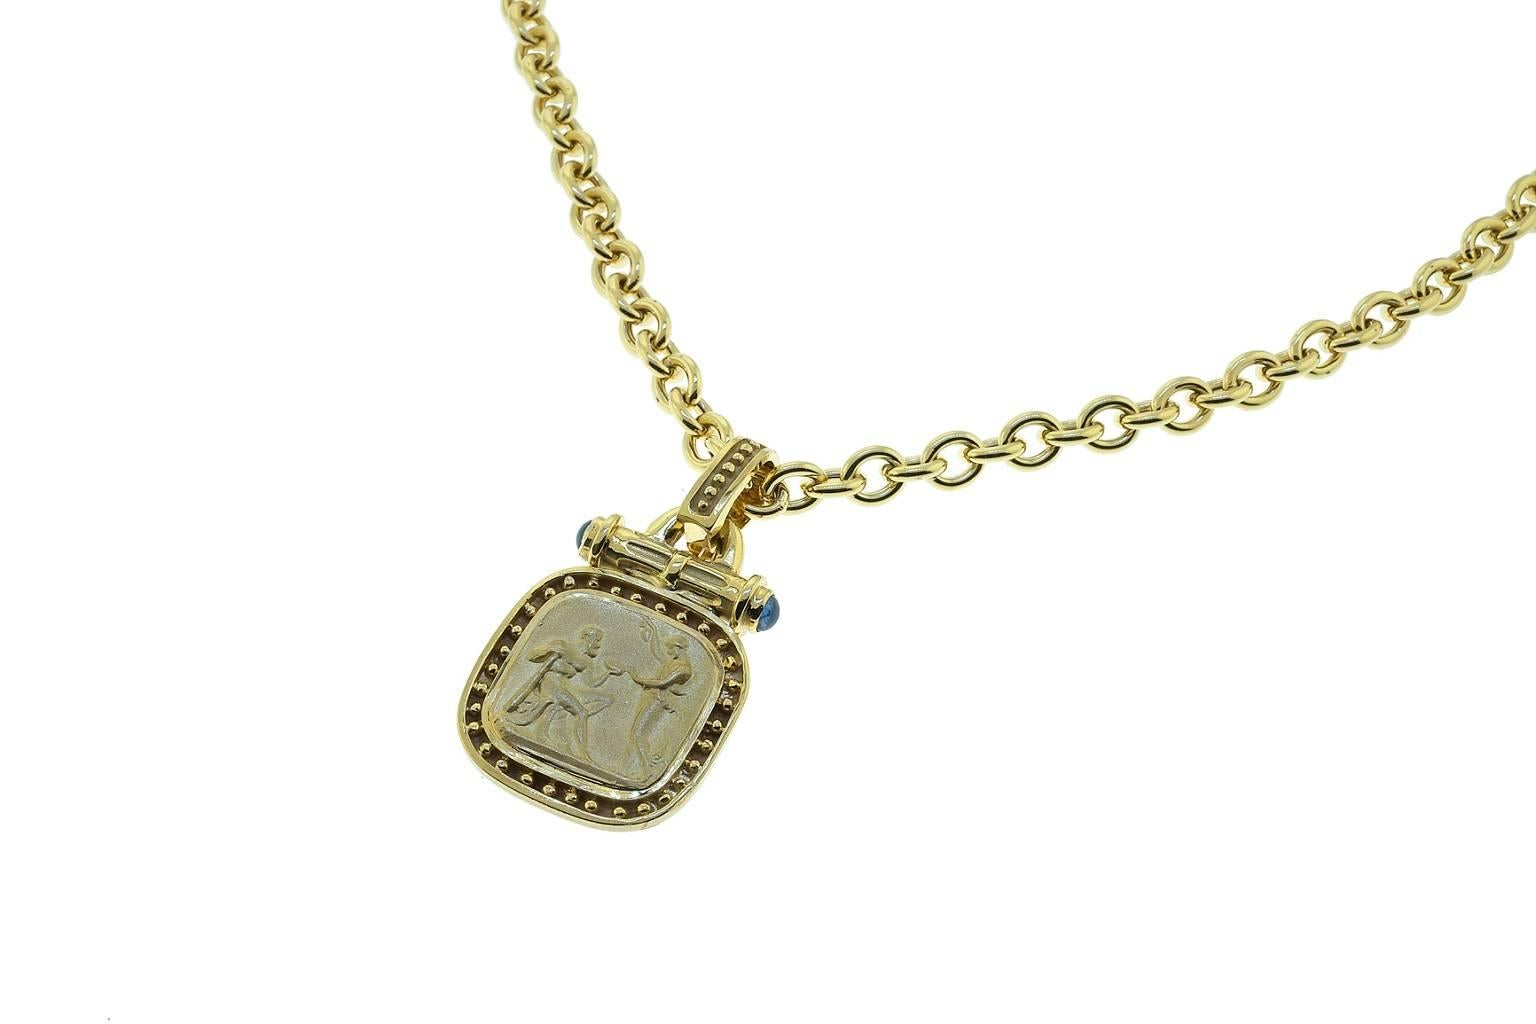 14K yellow gold roman scene design enhancer with sapphire cabochons.
Necklace can be purchased separately
